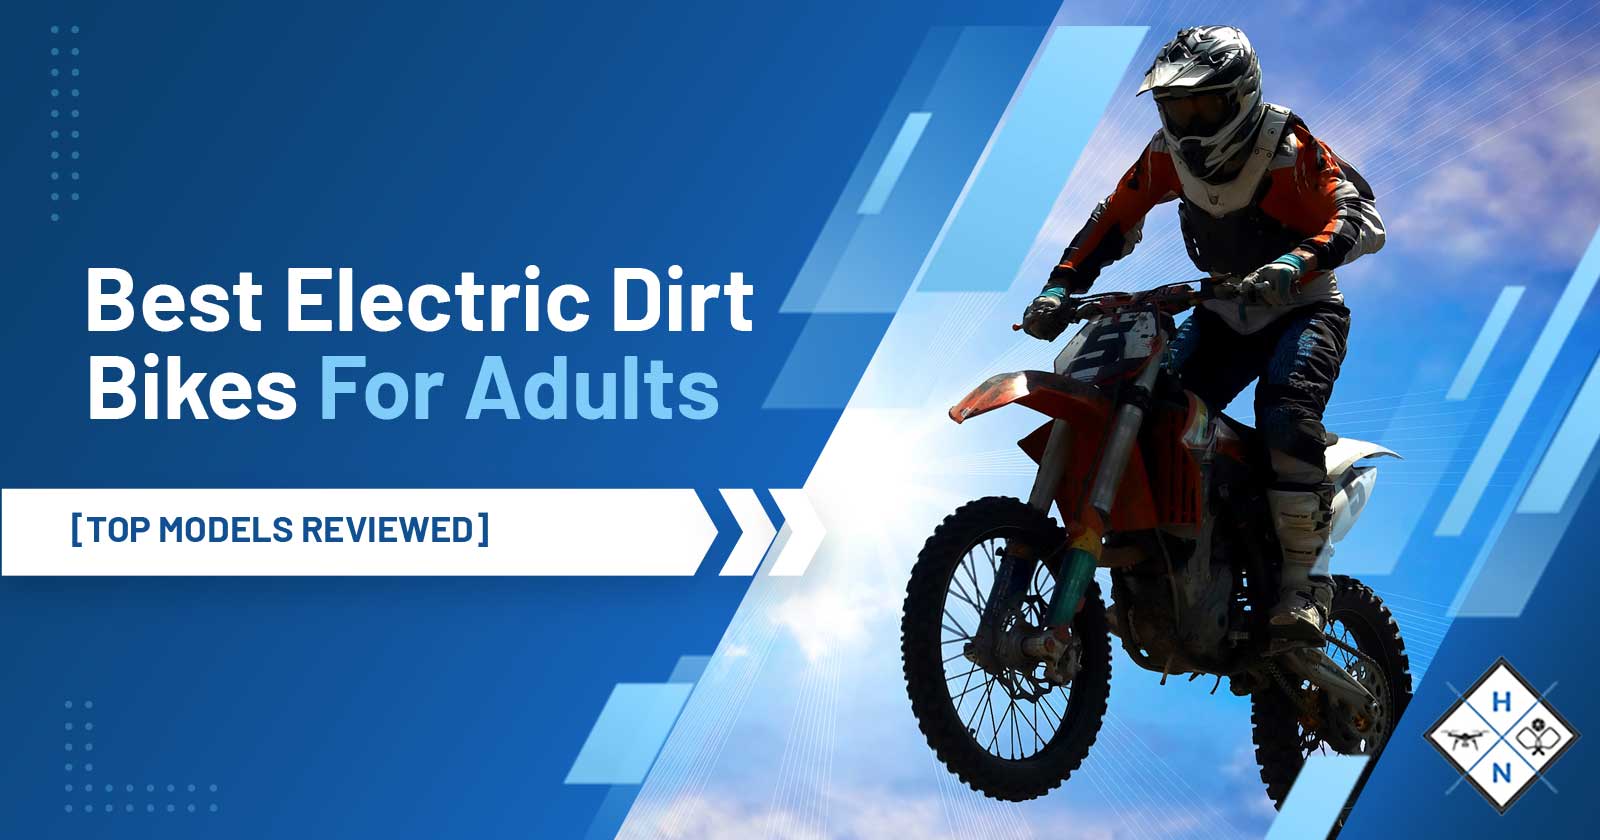 Best Electric Dirt Bikes for Adults [TOP MODELS REVIEWED]